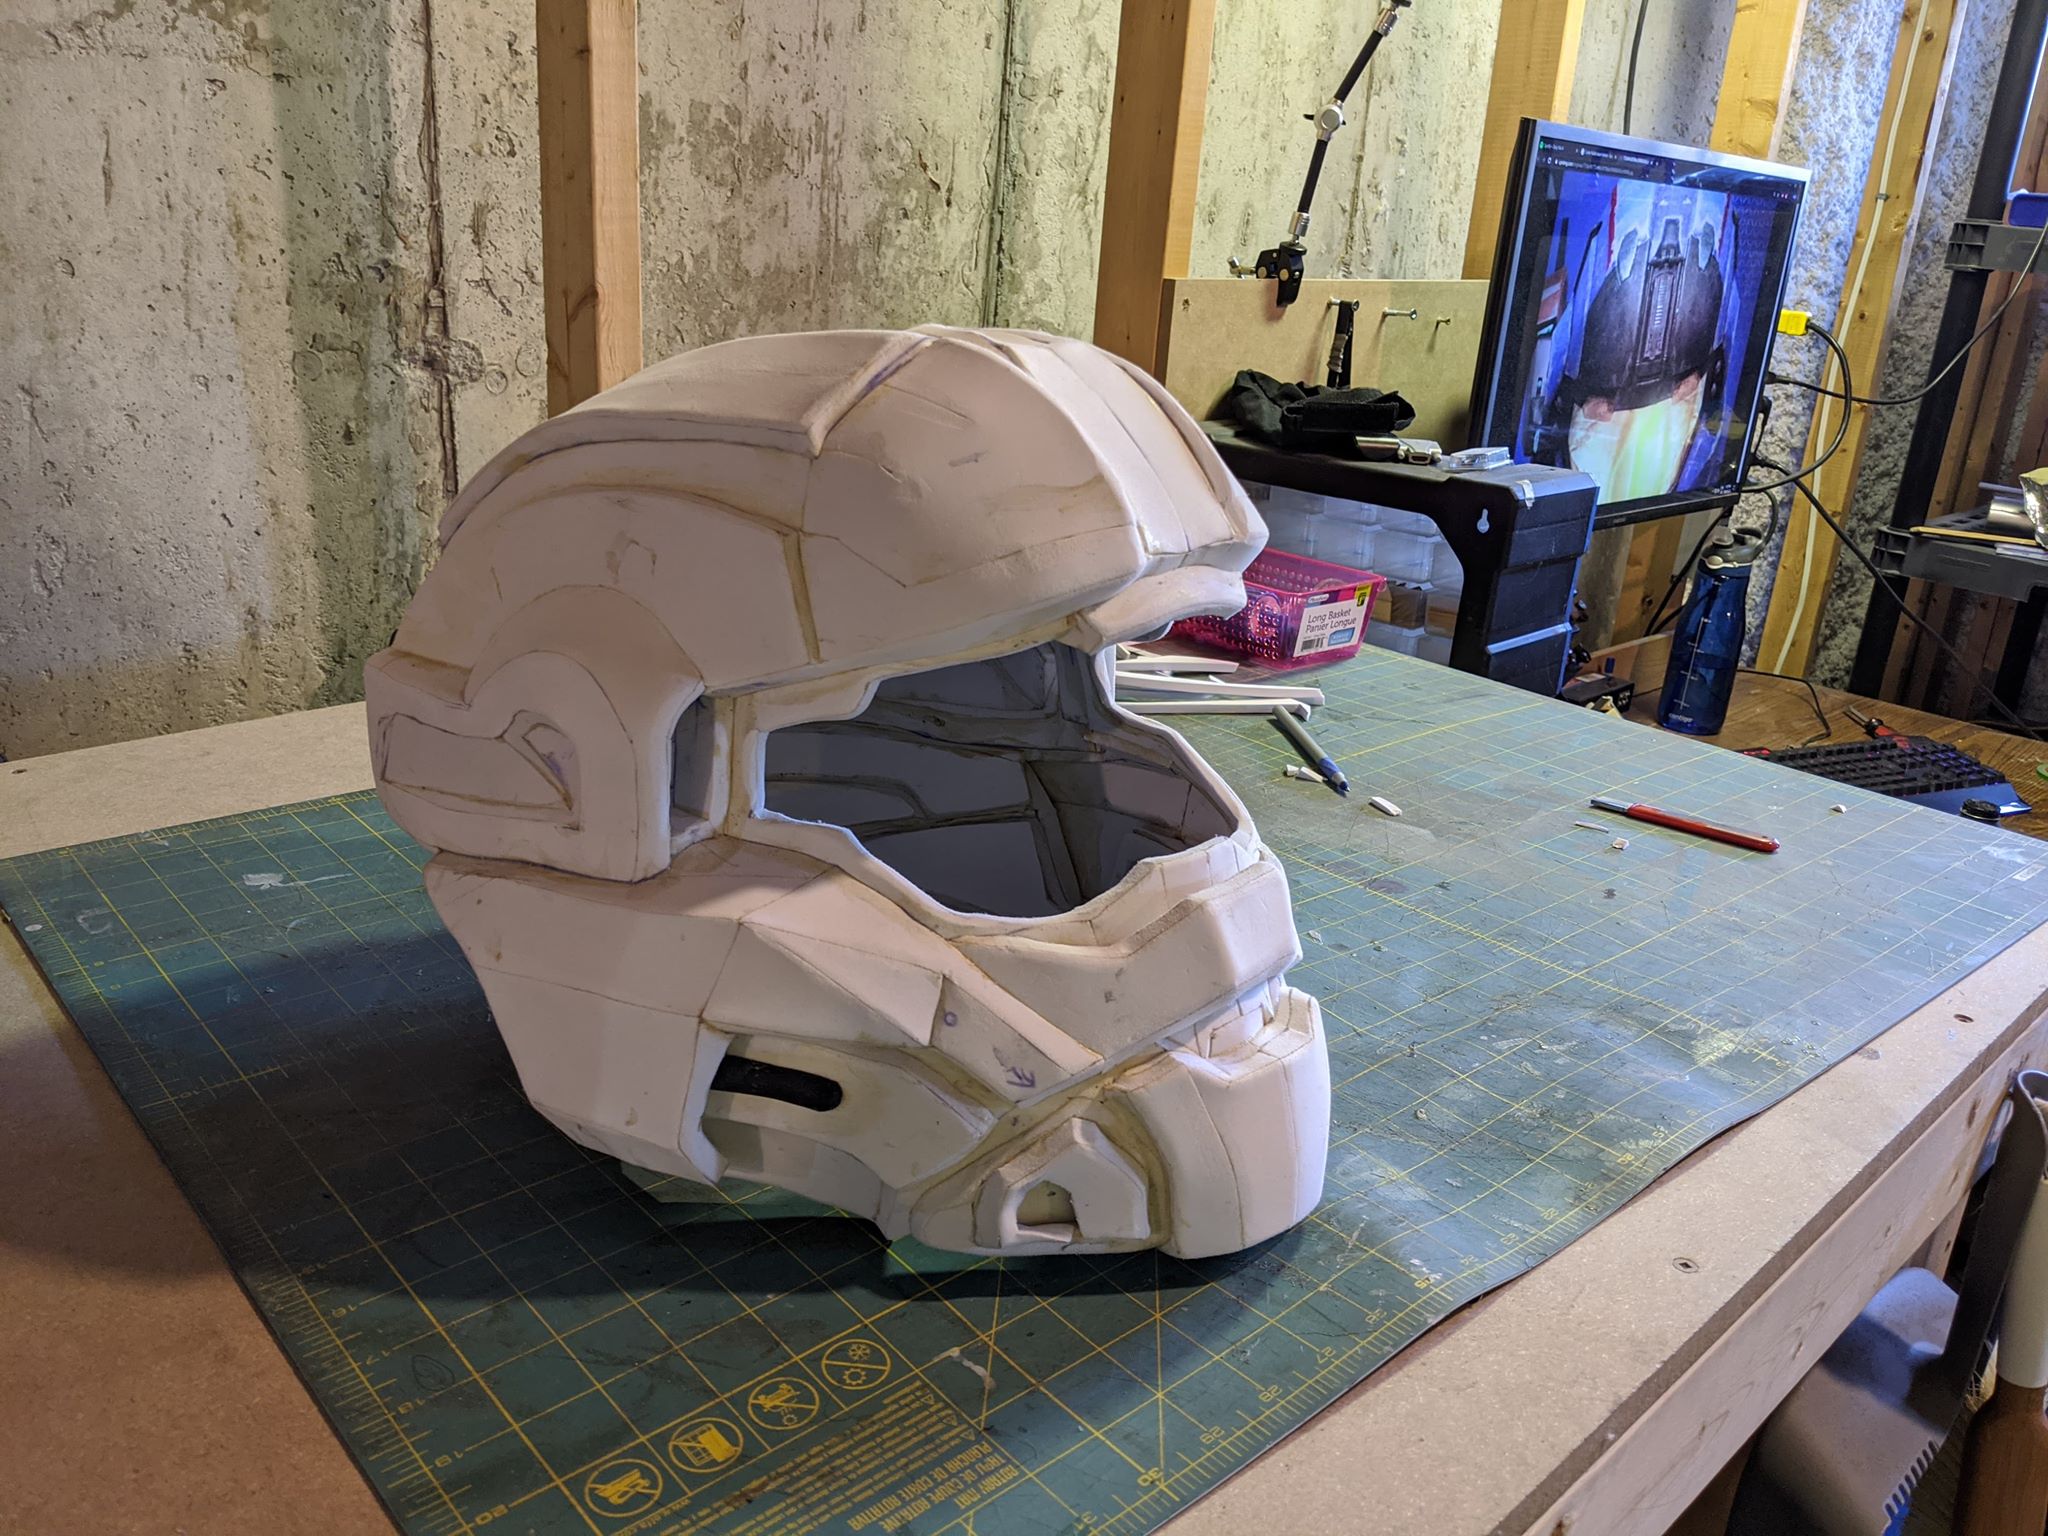 Dead space lvl 3 helmet.  Halo Costume and Prop Maker Community - 405th